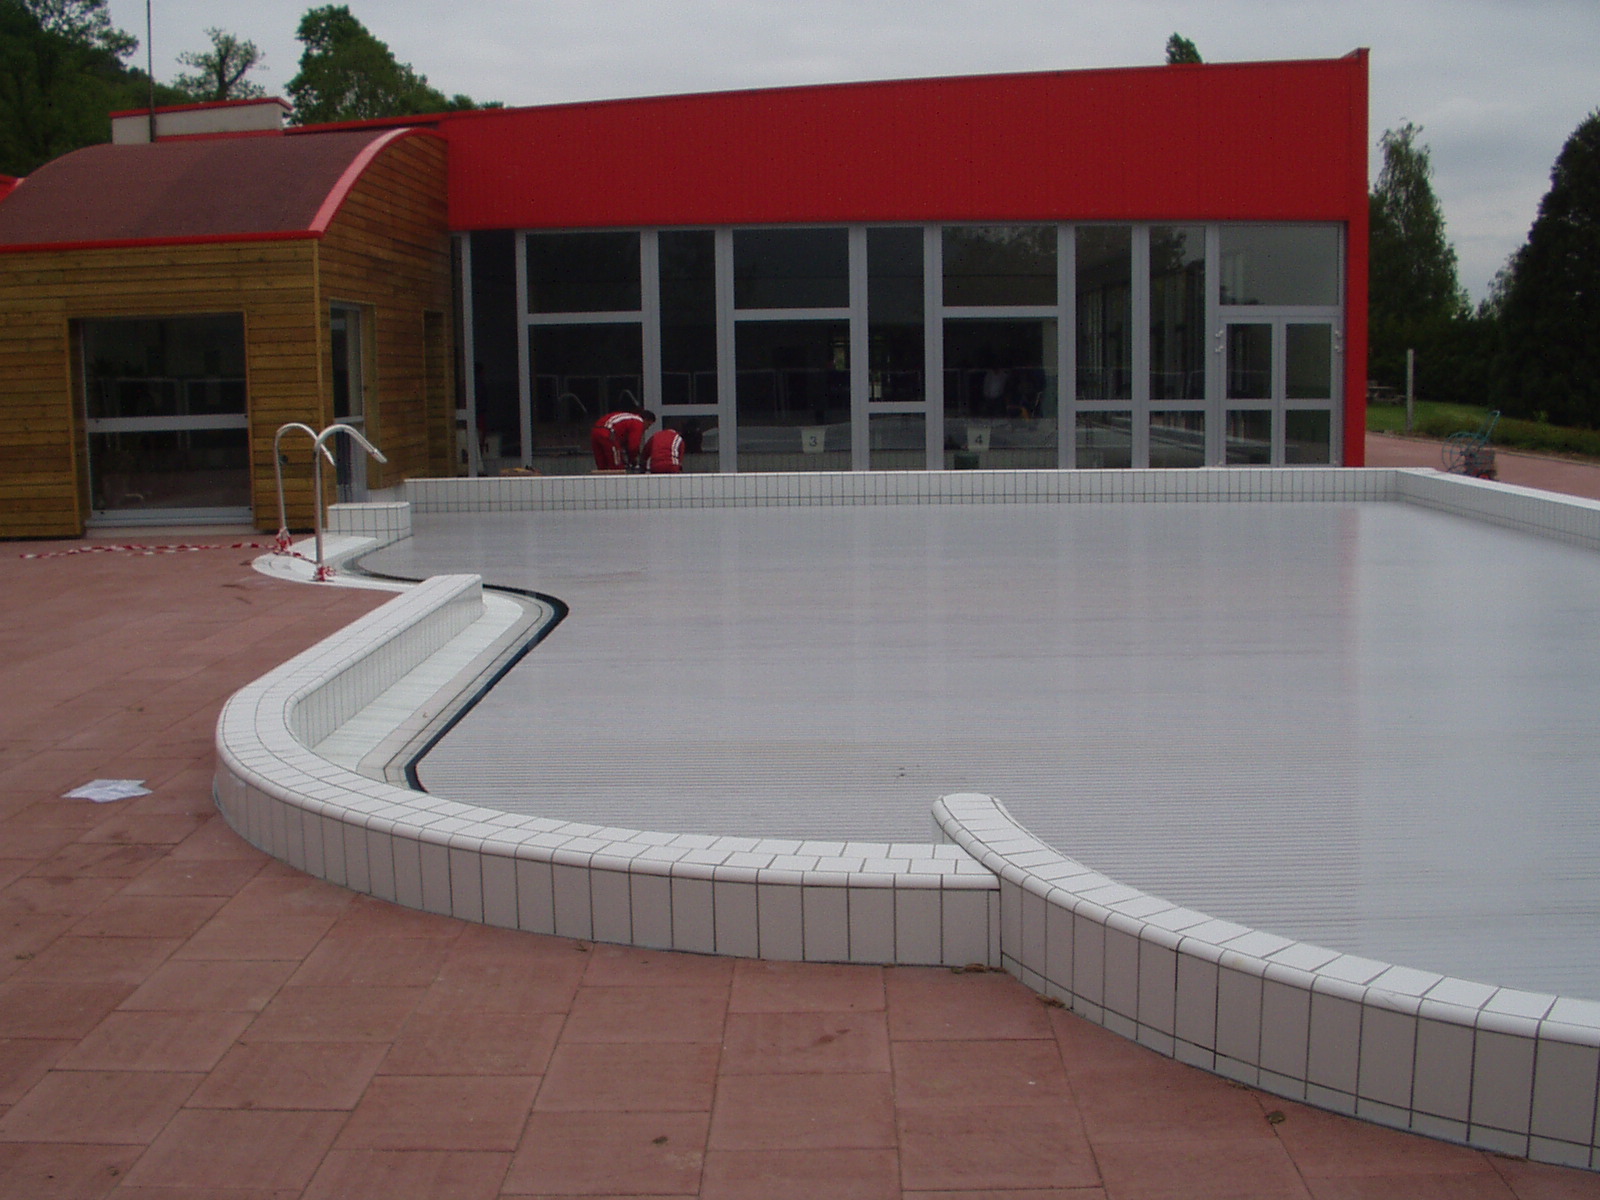 automatic insulated pool cover